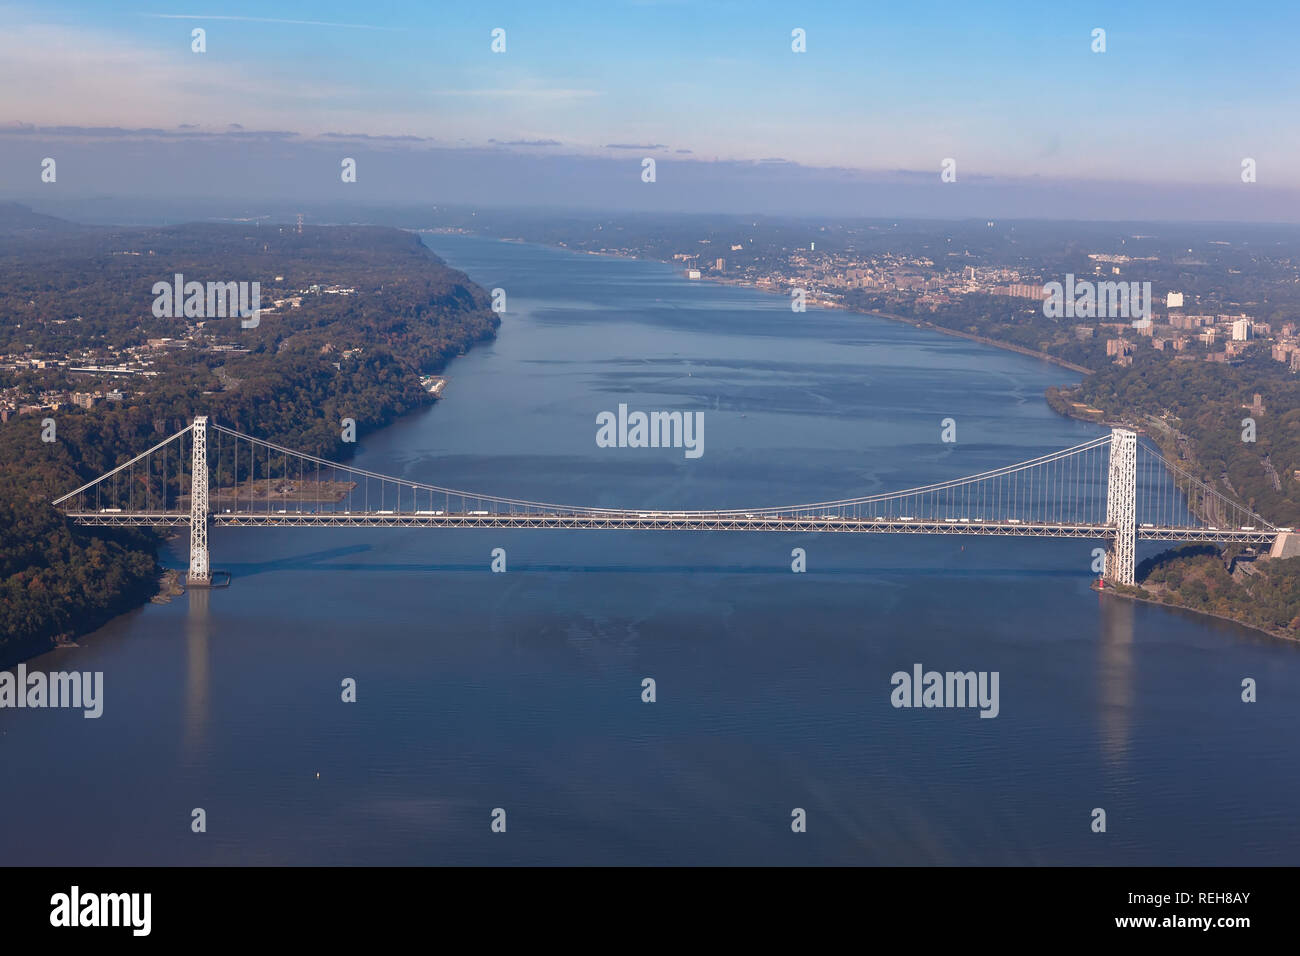 George Washington Bridge between Manhattan and New Jersey in New York NYC in USA. Aerial helicopter view. Stock Photo